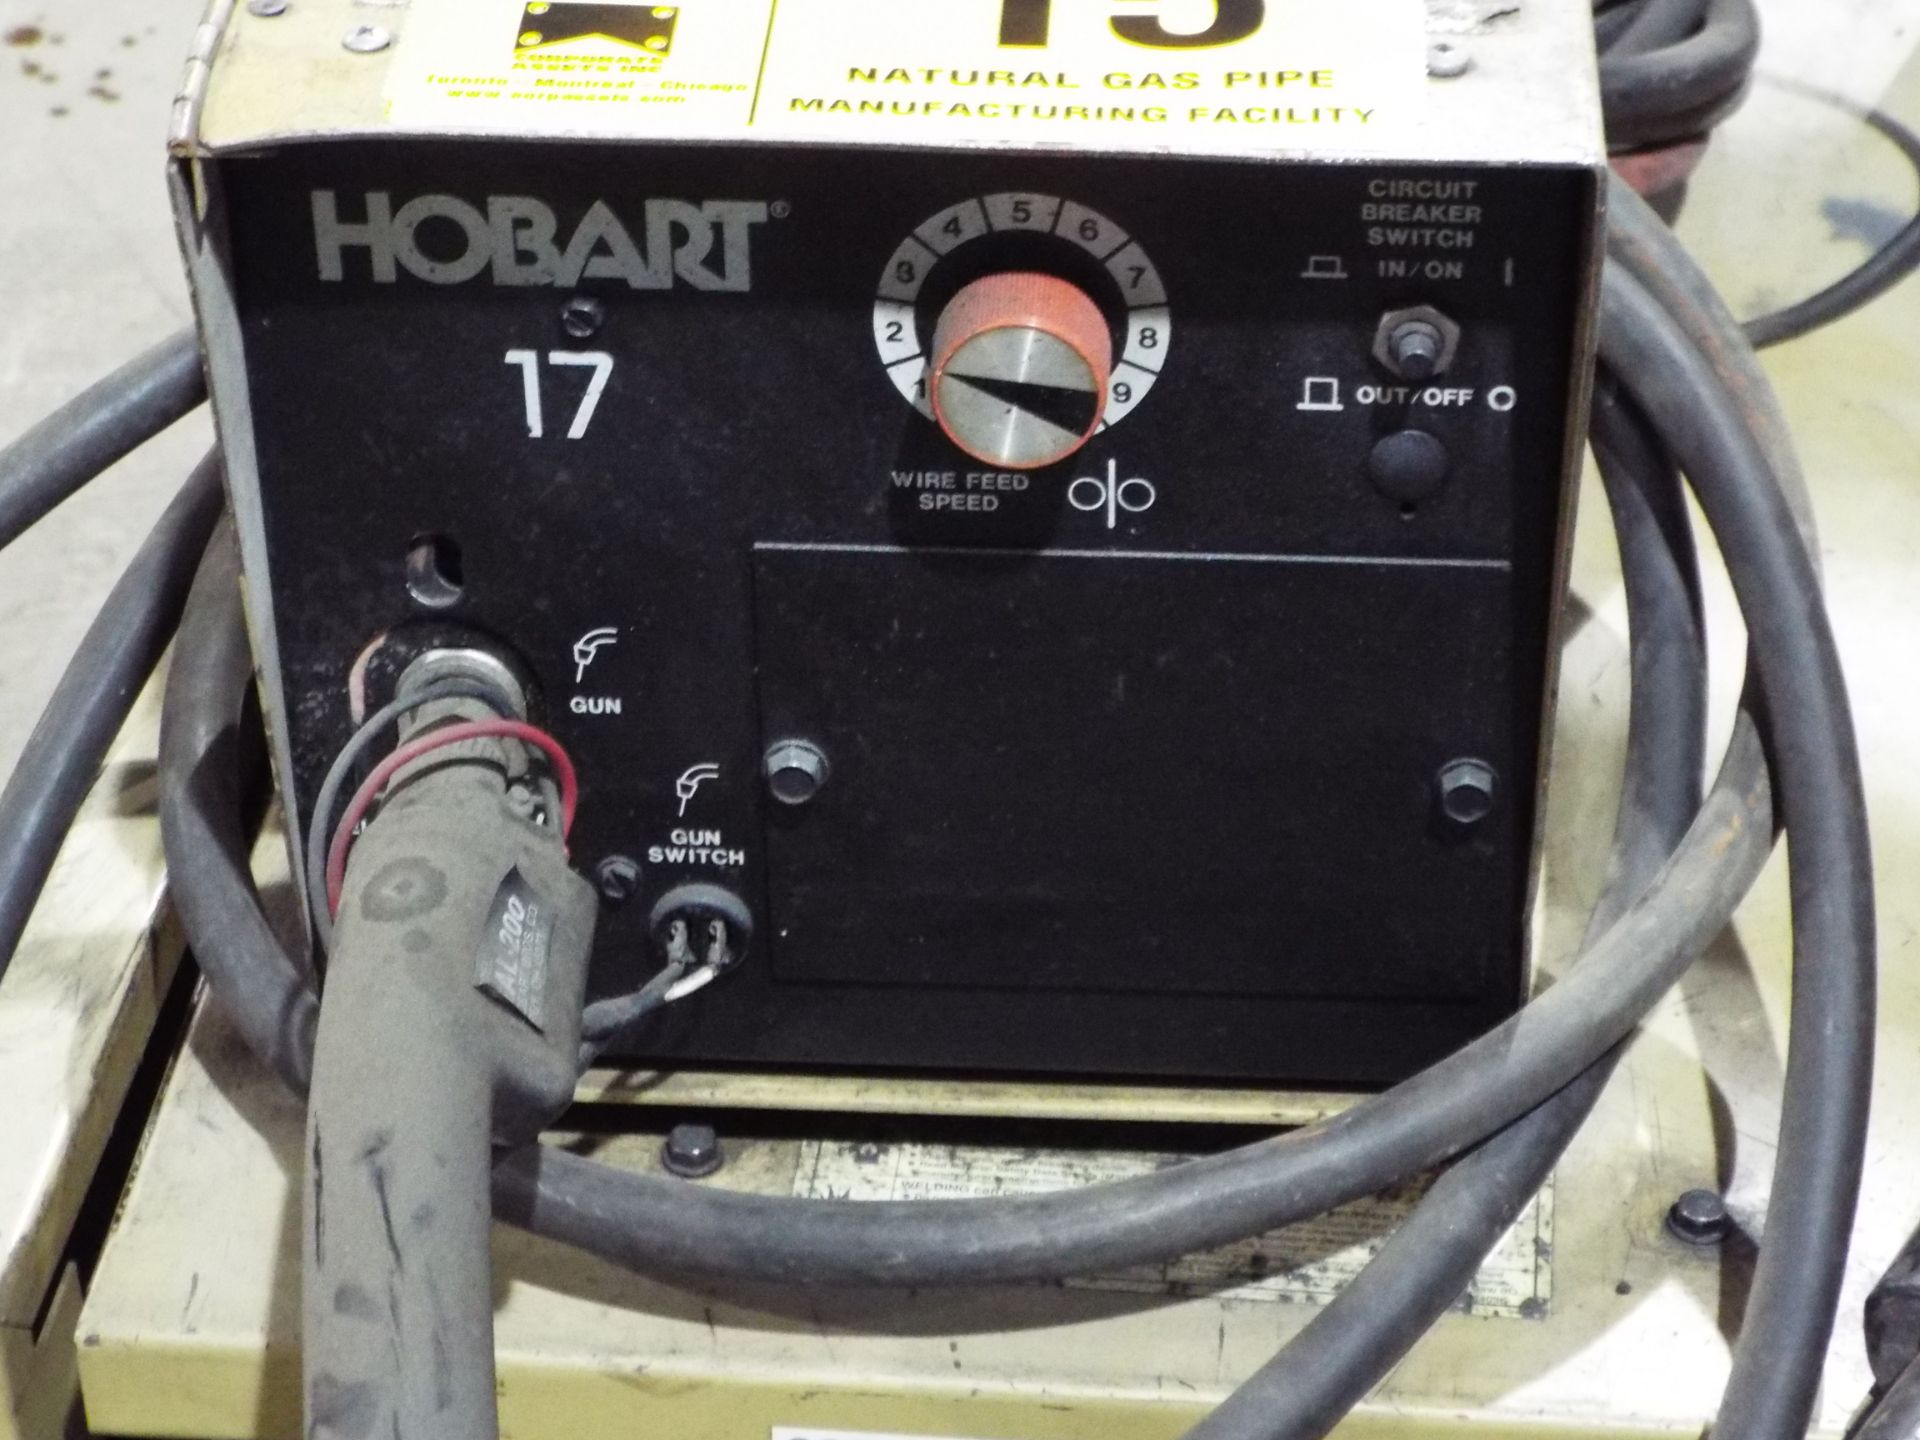 HOBART FABSTAR 4030 MIG WELDER WITH HOBART 17 WIRE FEED, CABLES AND GUN S/N: 294WS34958 - Image 2 of 2